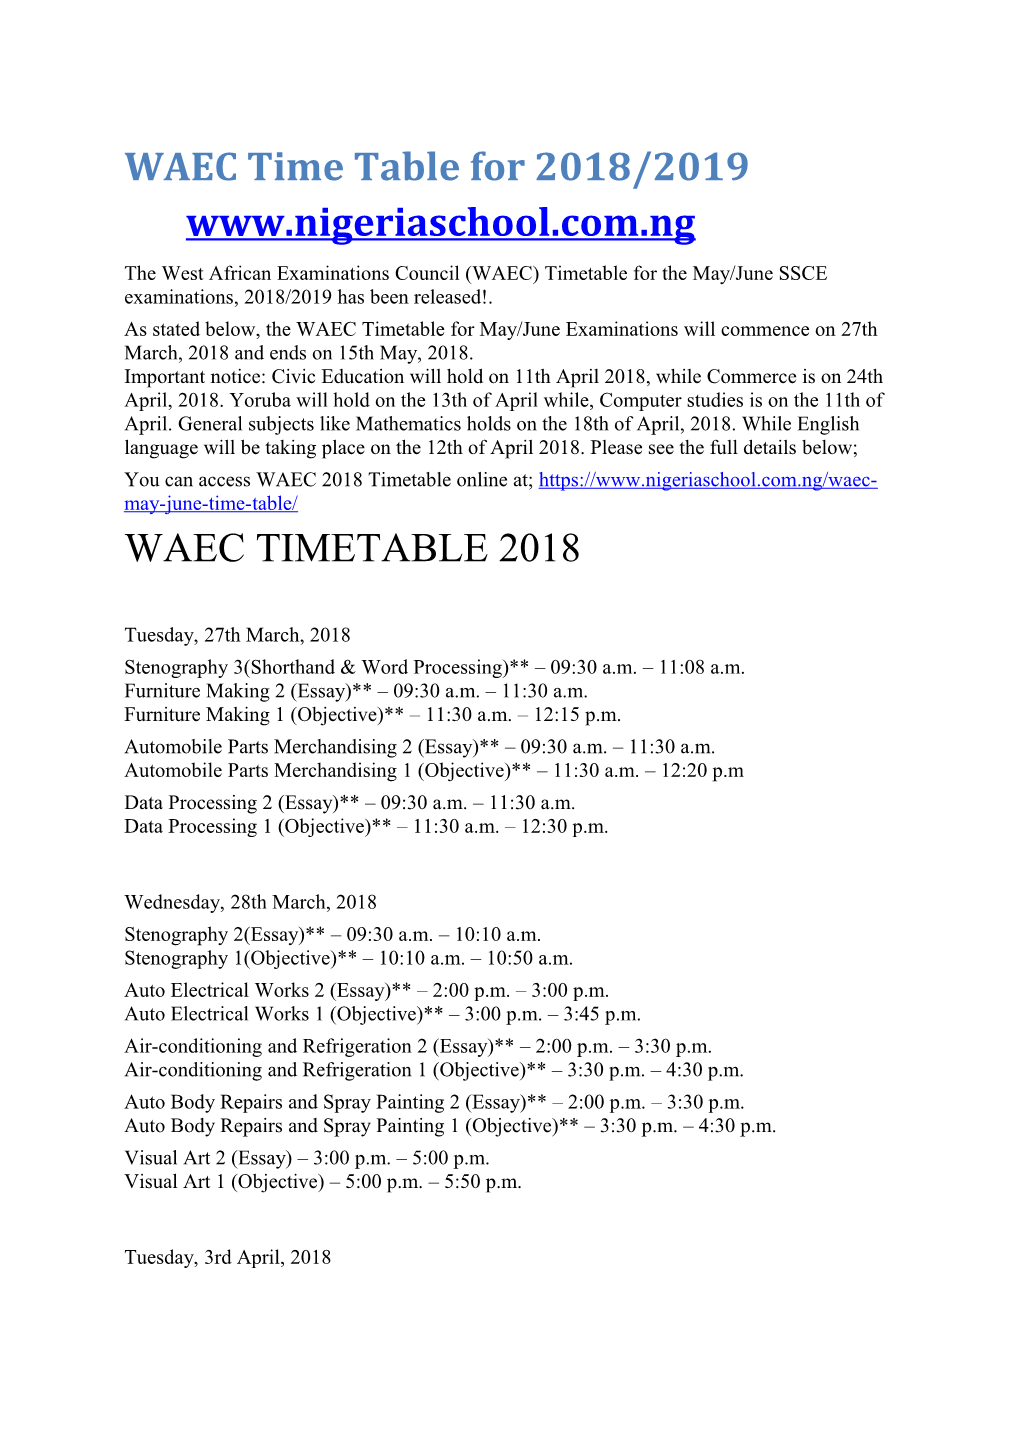 WAEC Time Table for 2018/2019